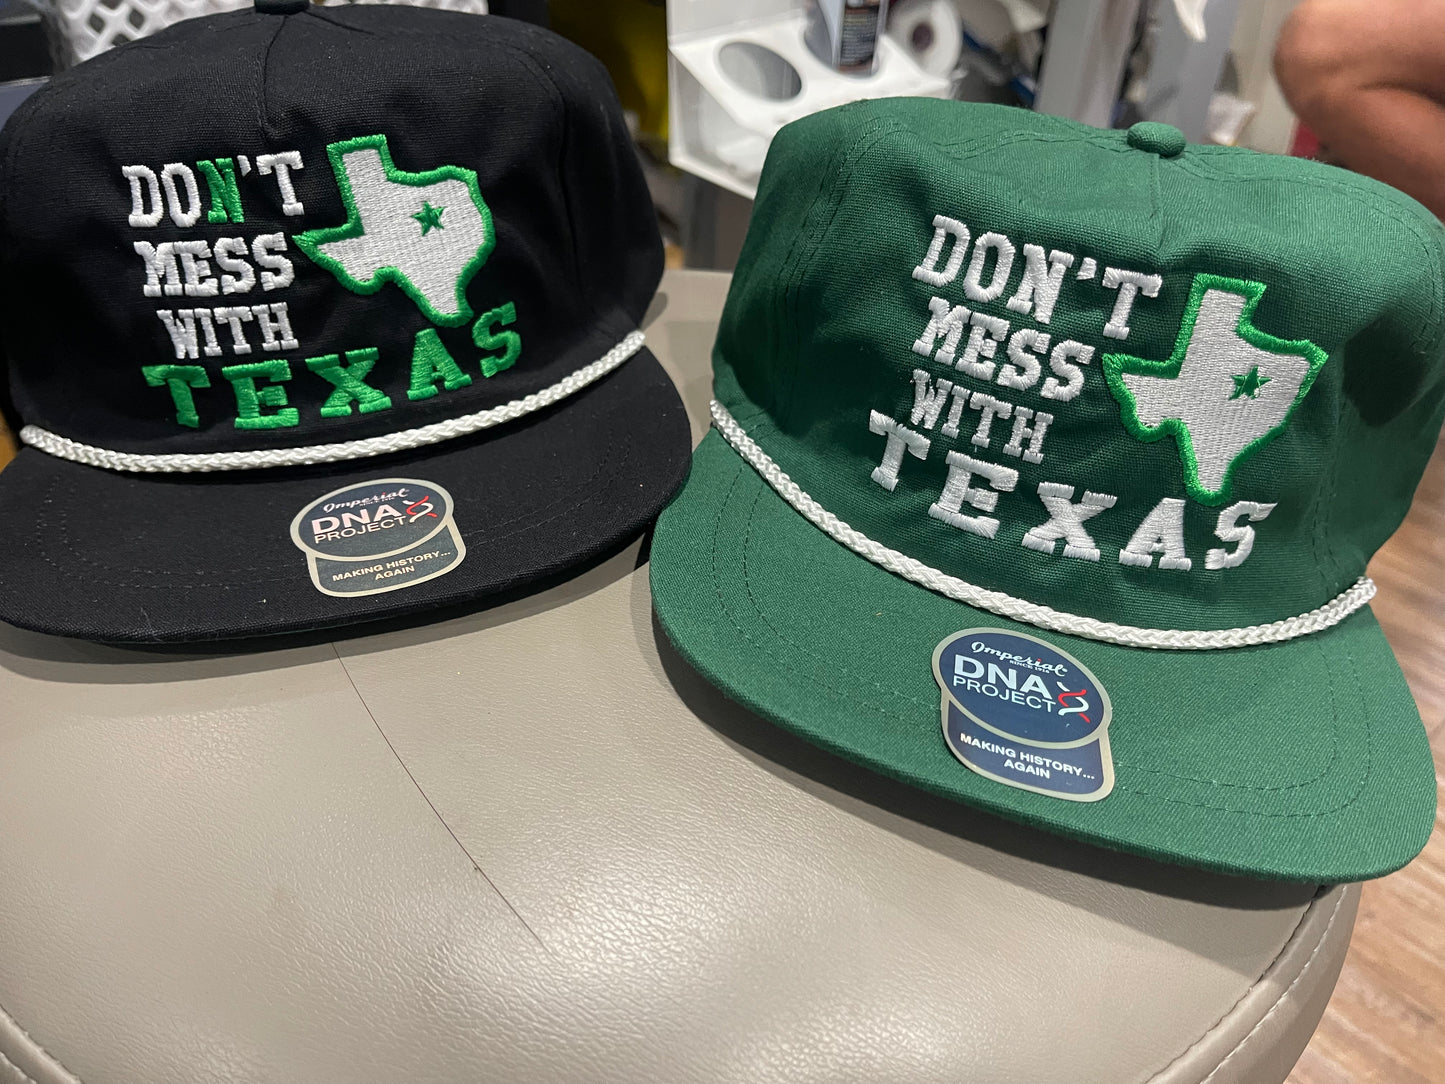 Texas Don’t mess with Texas hat